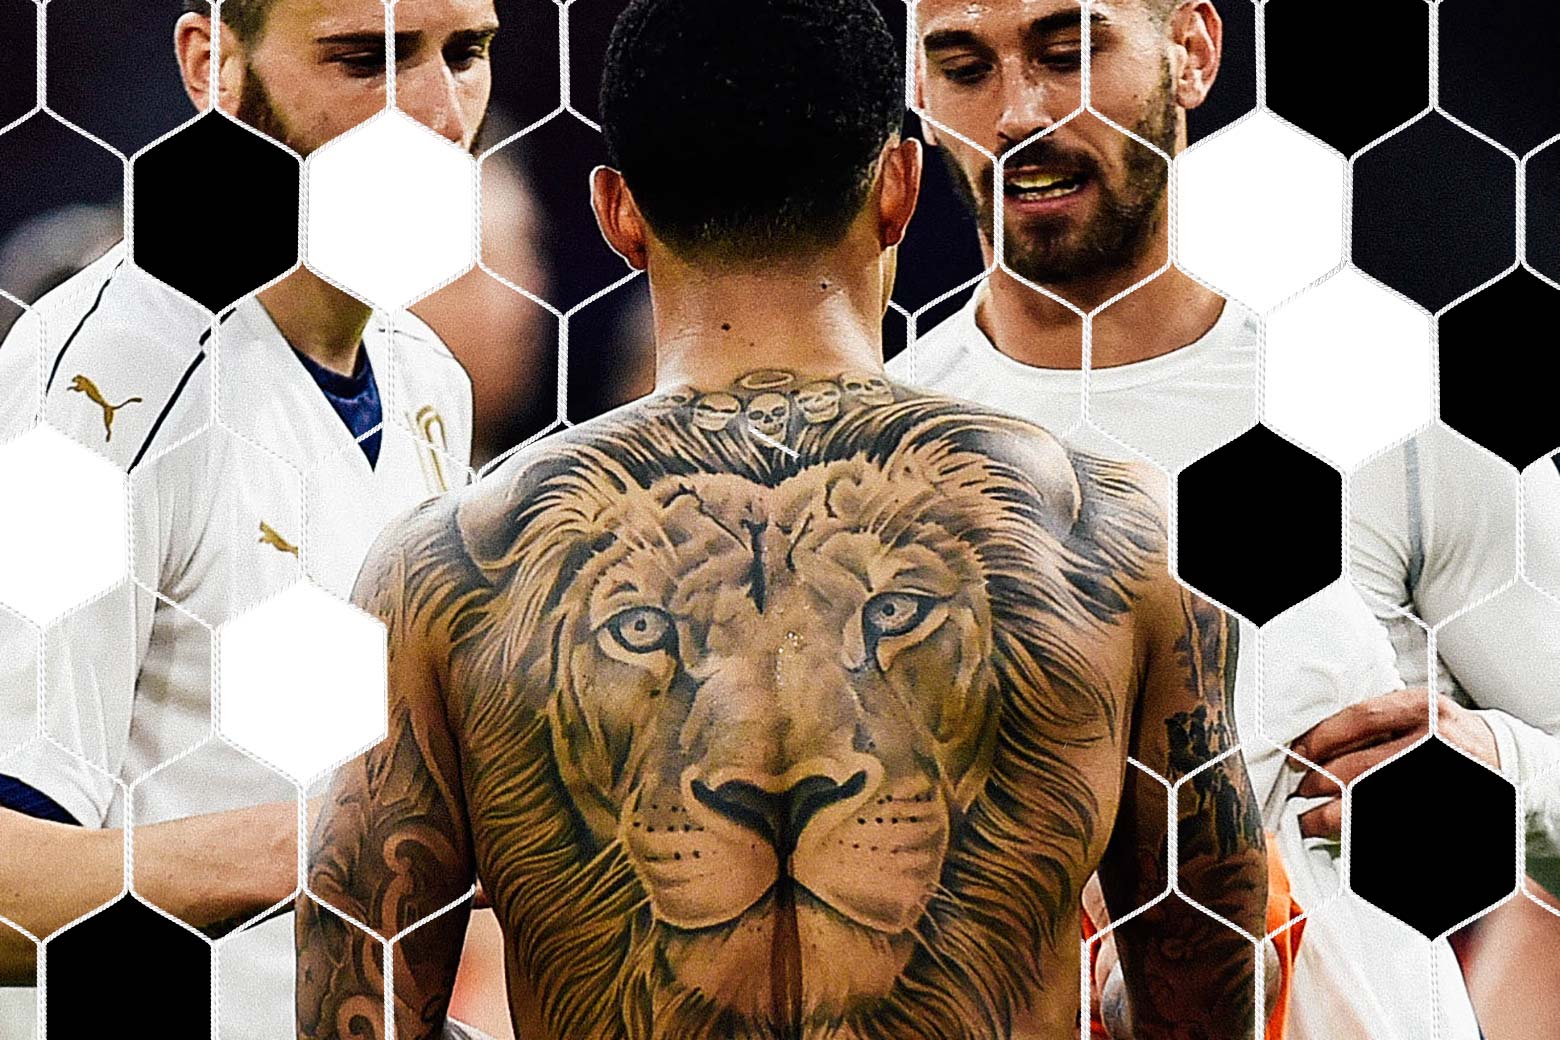 What is a great lion tattoo design? - Quora